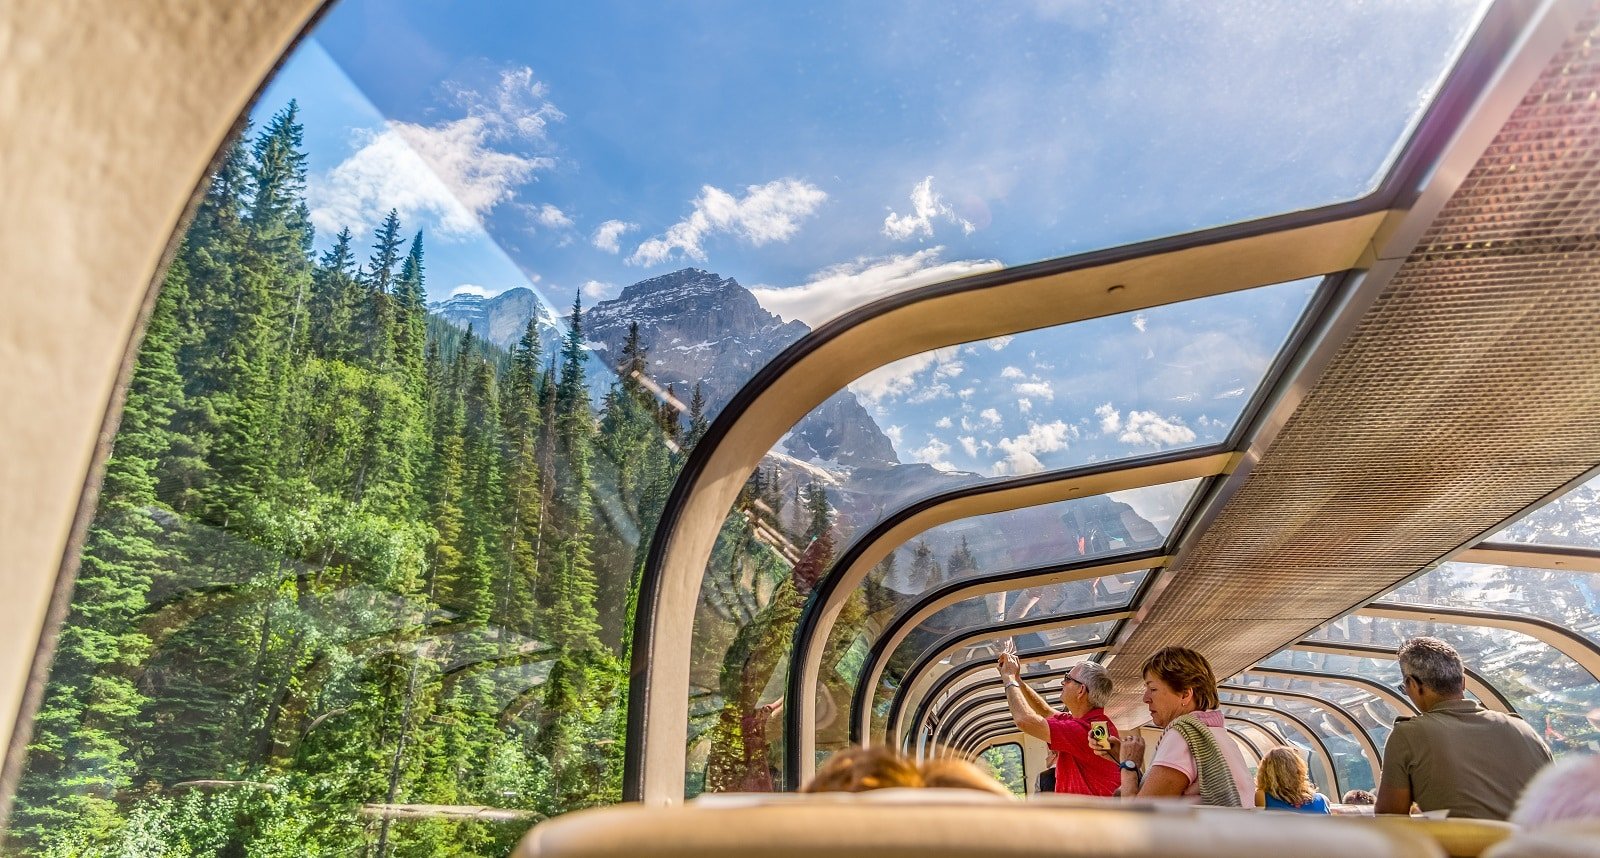 <p><span>Discover the Canadian Rockies in style with the Rocky Mountaineer. Known for its glass-domed coaches, this luxury train offers panoramic views of Western Canada’s most stunning scenery, including mountains, lakes, and wildlife. Choose from several routes, each offering a unique perspective of Canada’s natural beauty.</span></p> <p><b>Insider’s Tip: </b><span>Travel in GoldLeaf Service for a bi-level glass-dome coach and gourmet meals.</span></p> <p><b>Best Time to Go: </b><span>Mid-April to mid-October, with the best chance for wildlife sightings in spring and fall.</span></p> <p><b>Highlight of the Journey: </b><span>The journey between Banff and Vancouver offers spectacular views of Lake Louise and the Spiral Tunnels.</span></p>